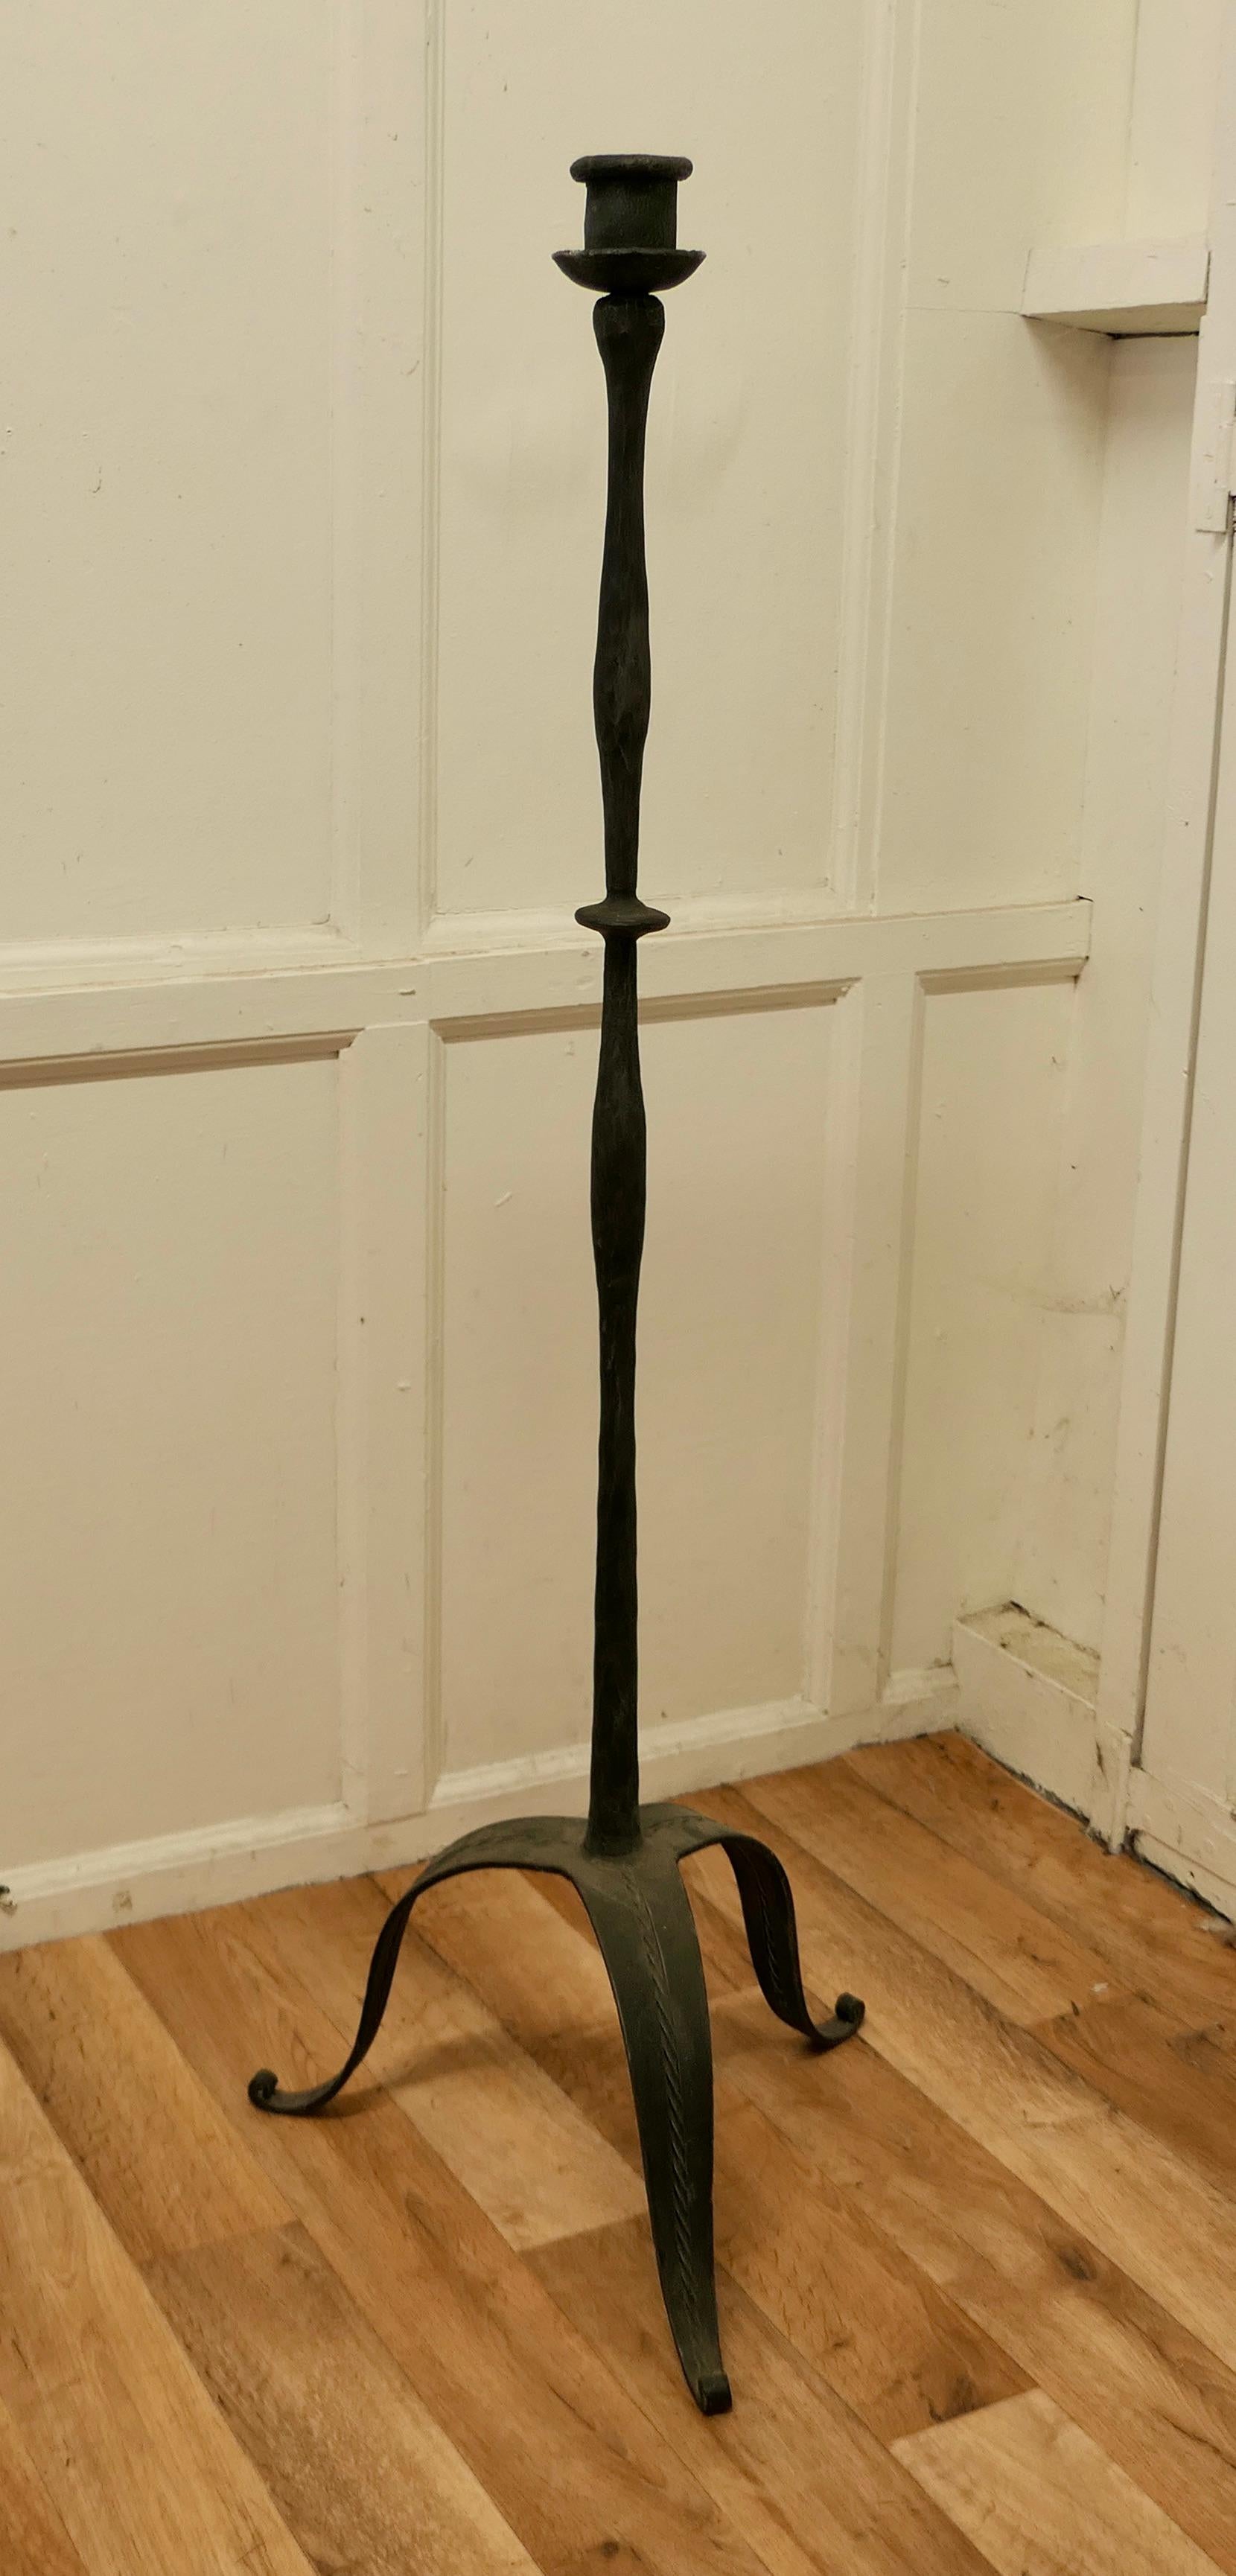 19th Century Blacksmith Made Gothic wrought iron floor lamp


This is a very unusual Gothic Wrought Iron Floor Lamp the stand is blacksmith made, it stands on 3 feet and takes a wax candle which sits in the centre sconce 
An unusual piece, it